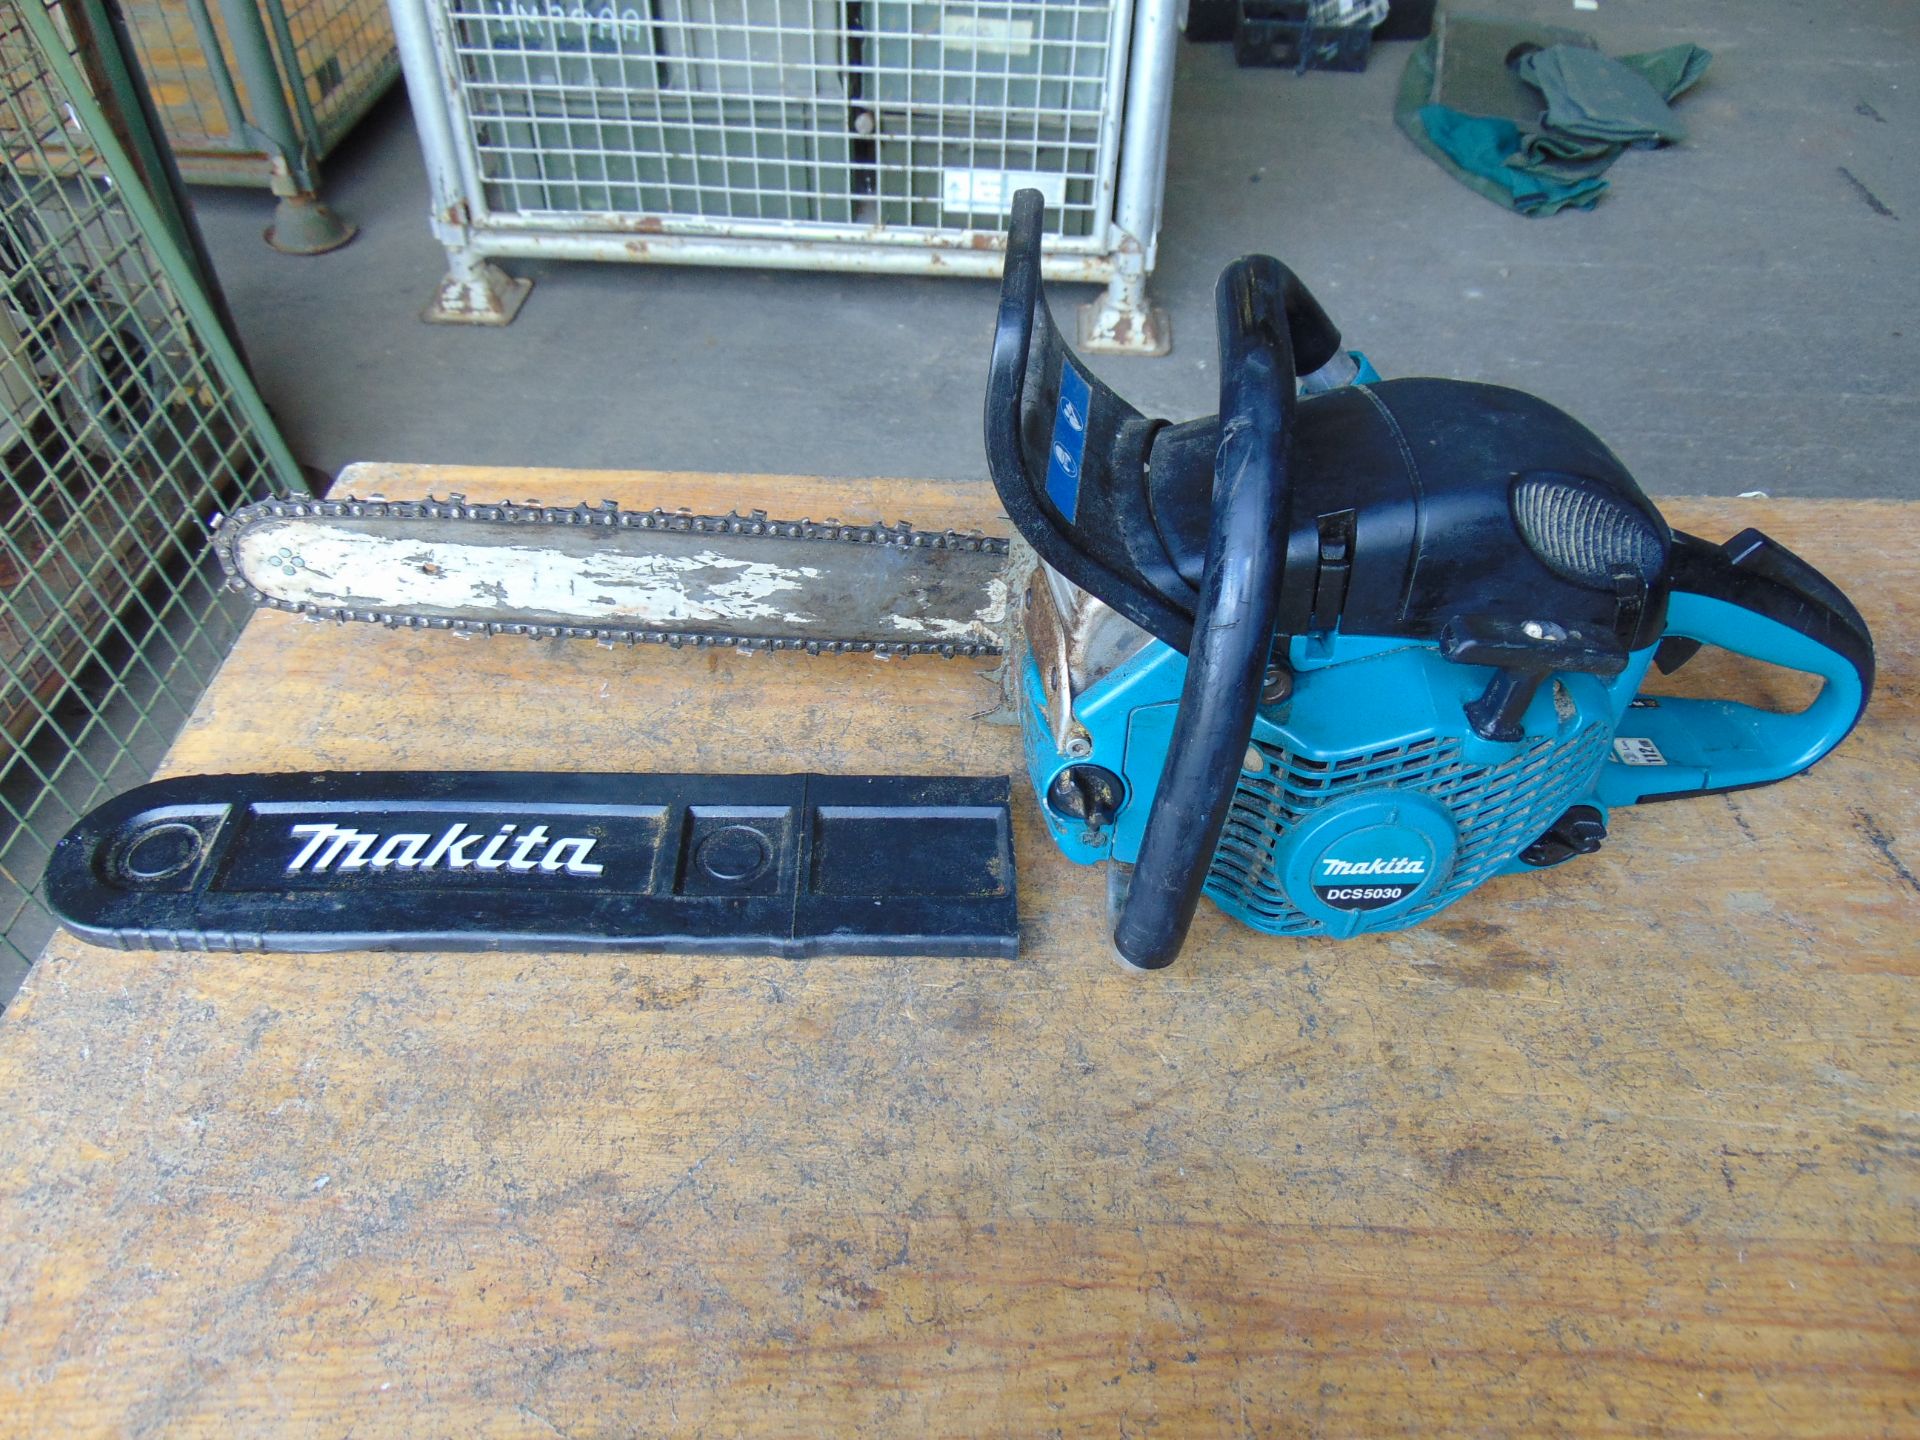 MAKITA DCS 5030 50CC Chainsaw c/w Chain Guard from MoD. - Image 2 of 6